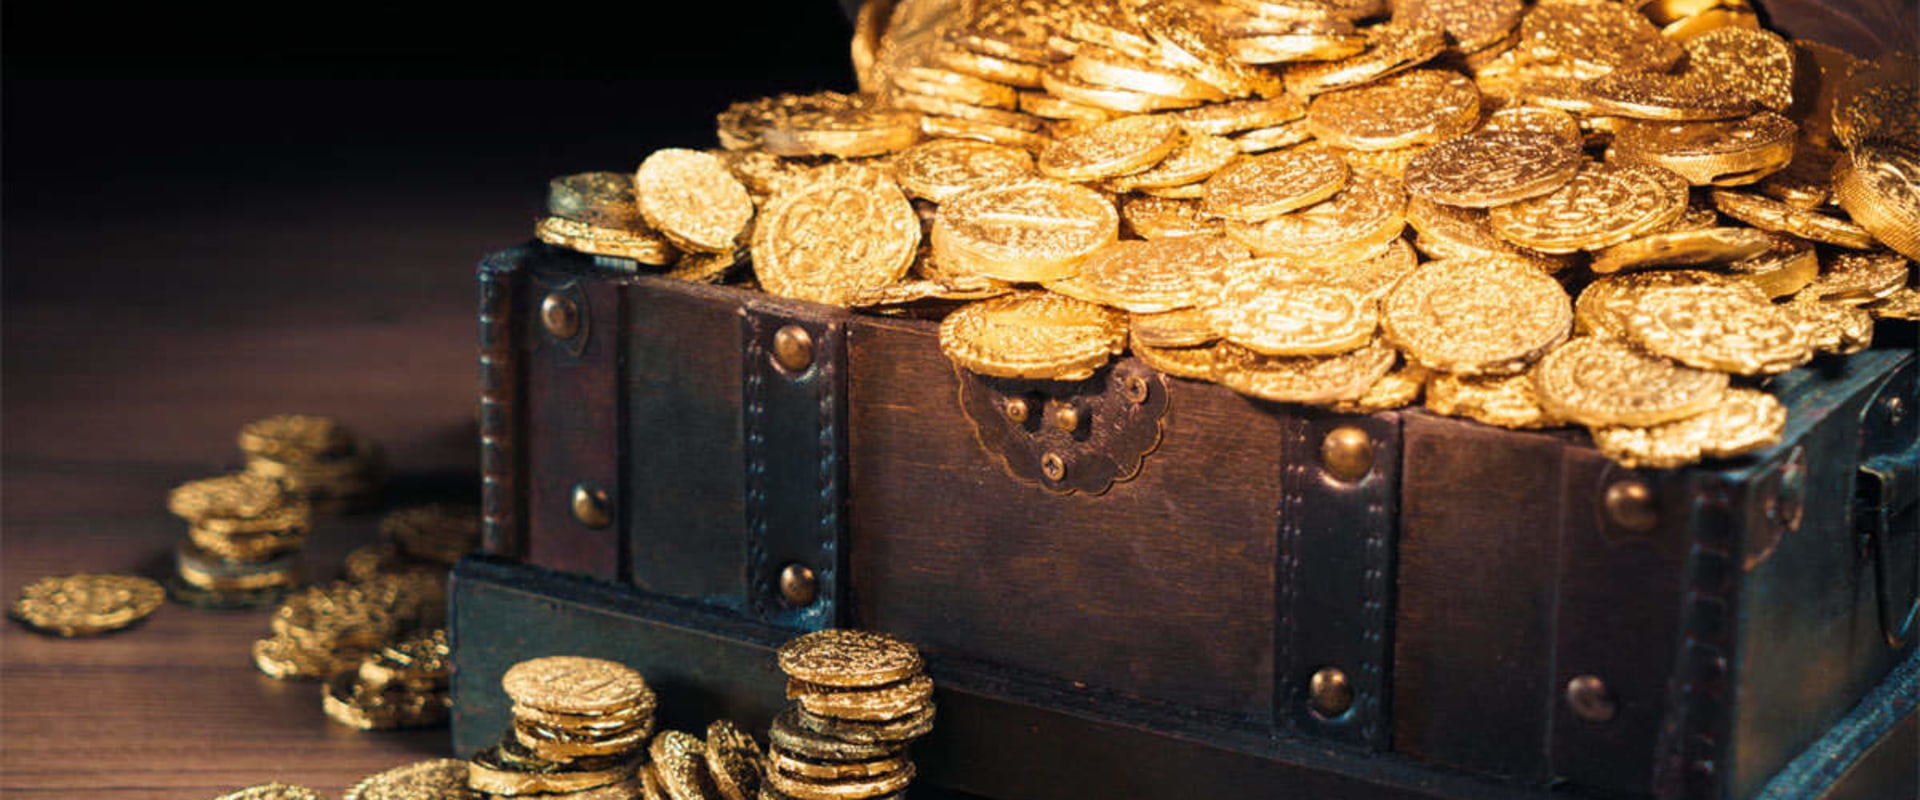 Should You Store Your Own Gold Safely at Home?